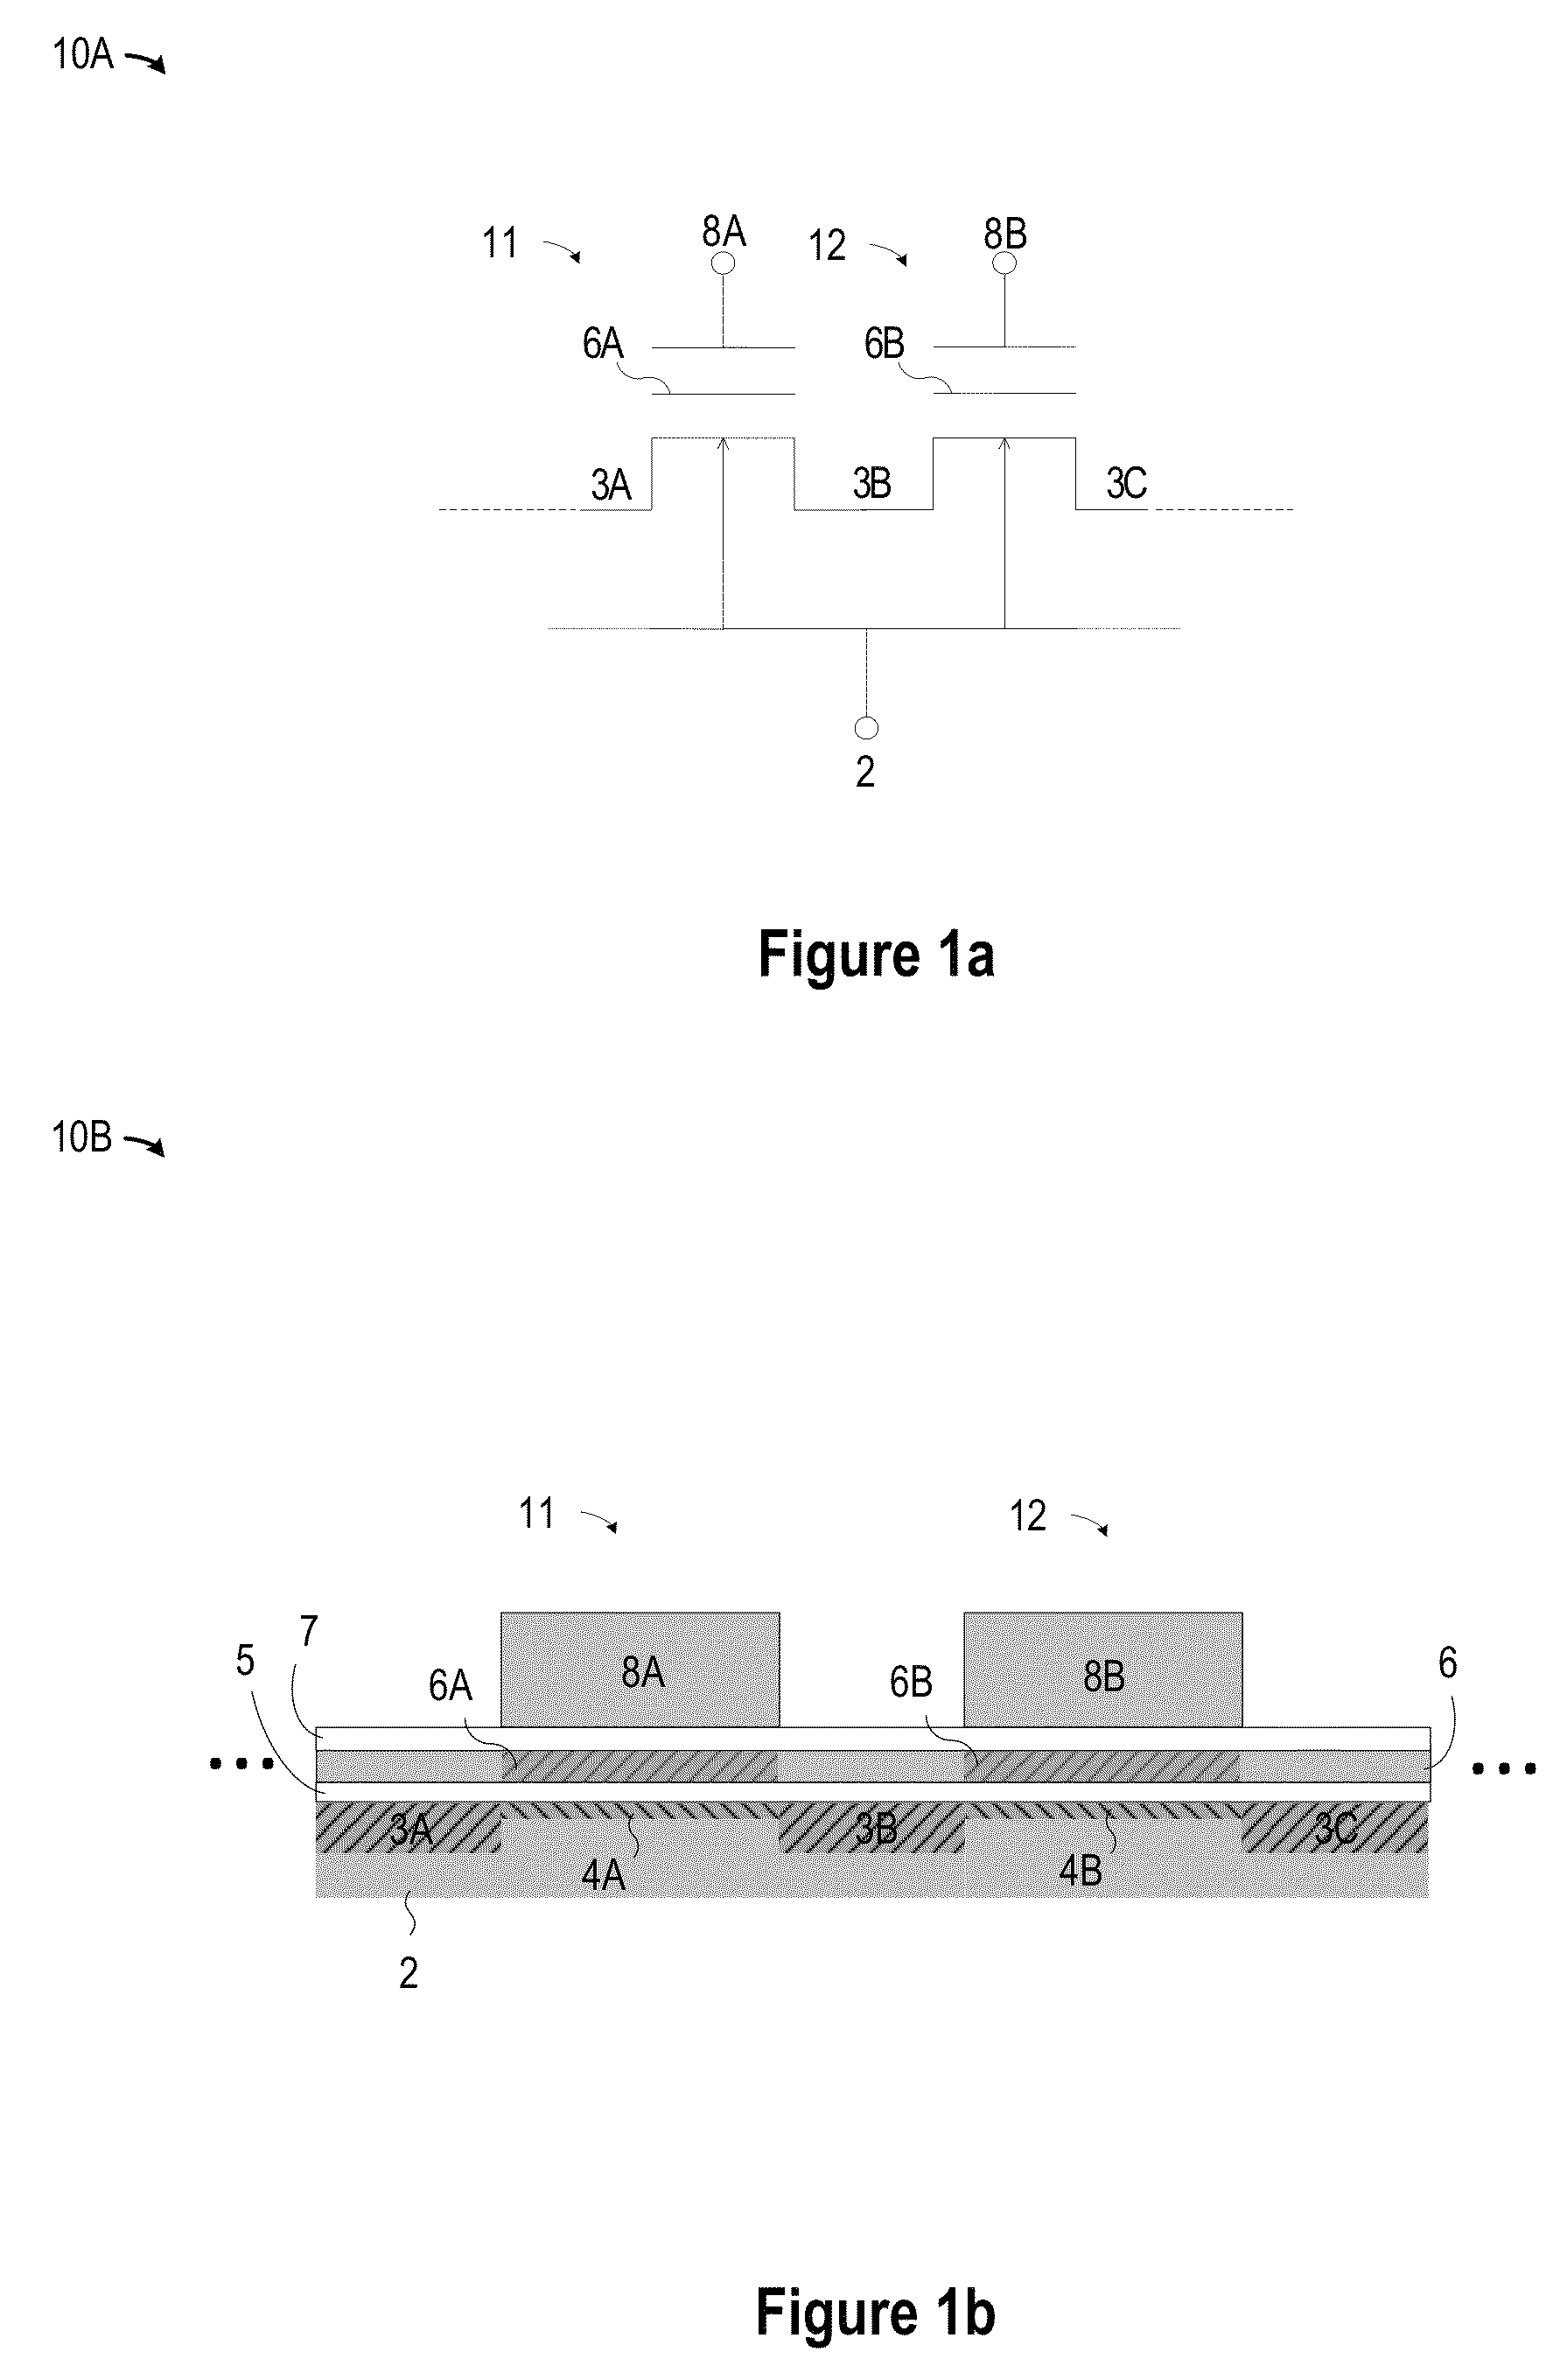 Three dimensional nonvolatile memory cell structure with upper body connection